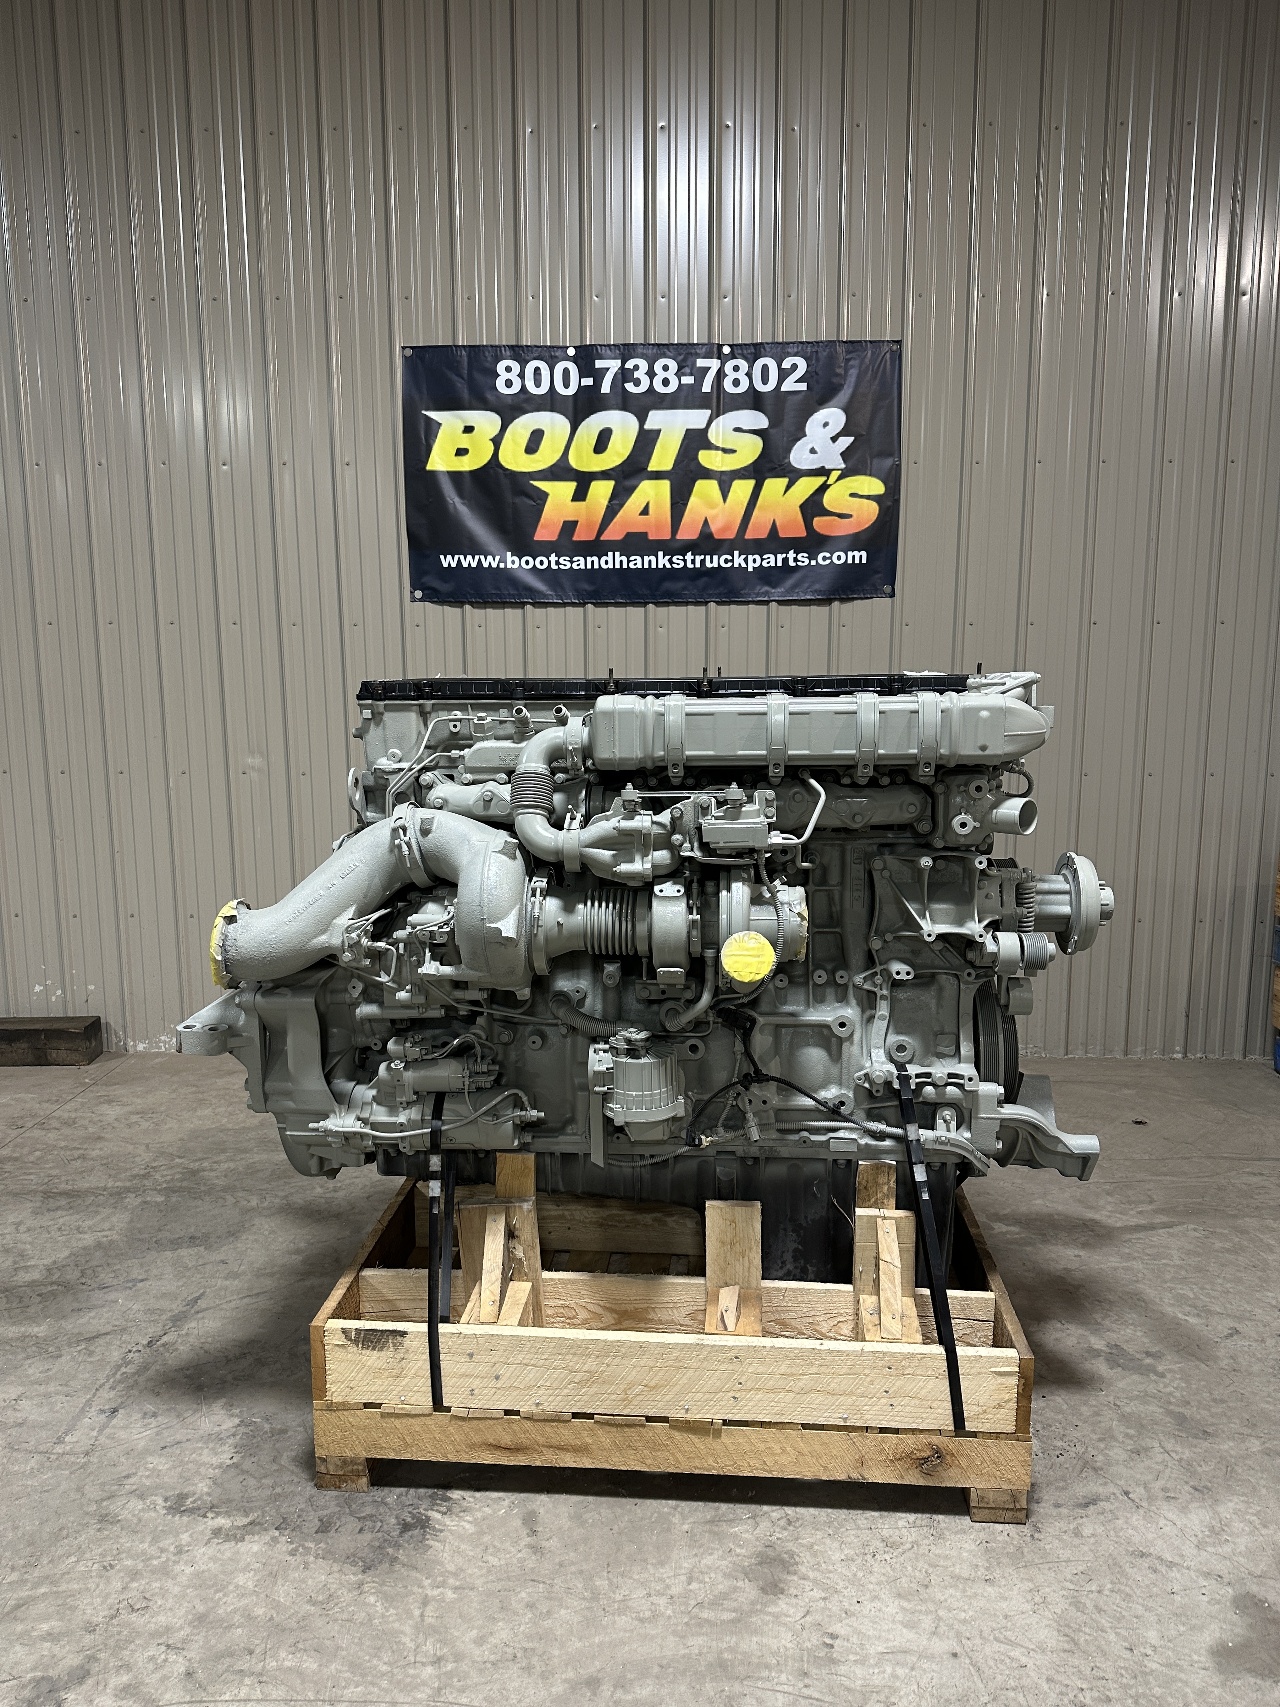 USED 2014 DETROIT DD15 COMPLETE ENGINE TRUCK PARTS #1994